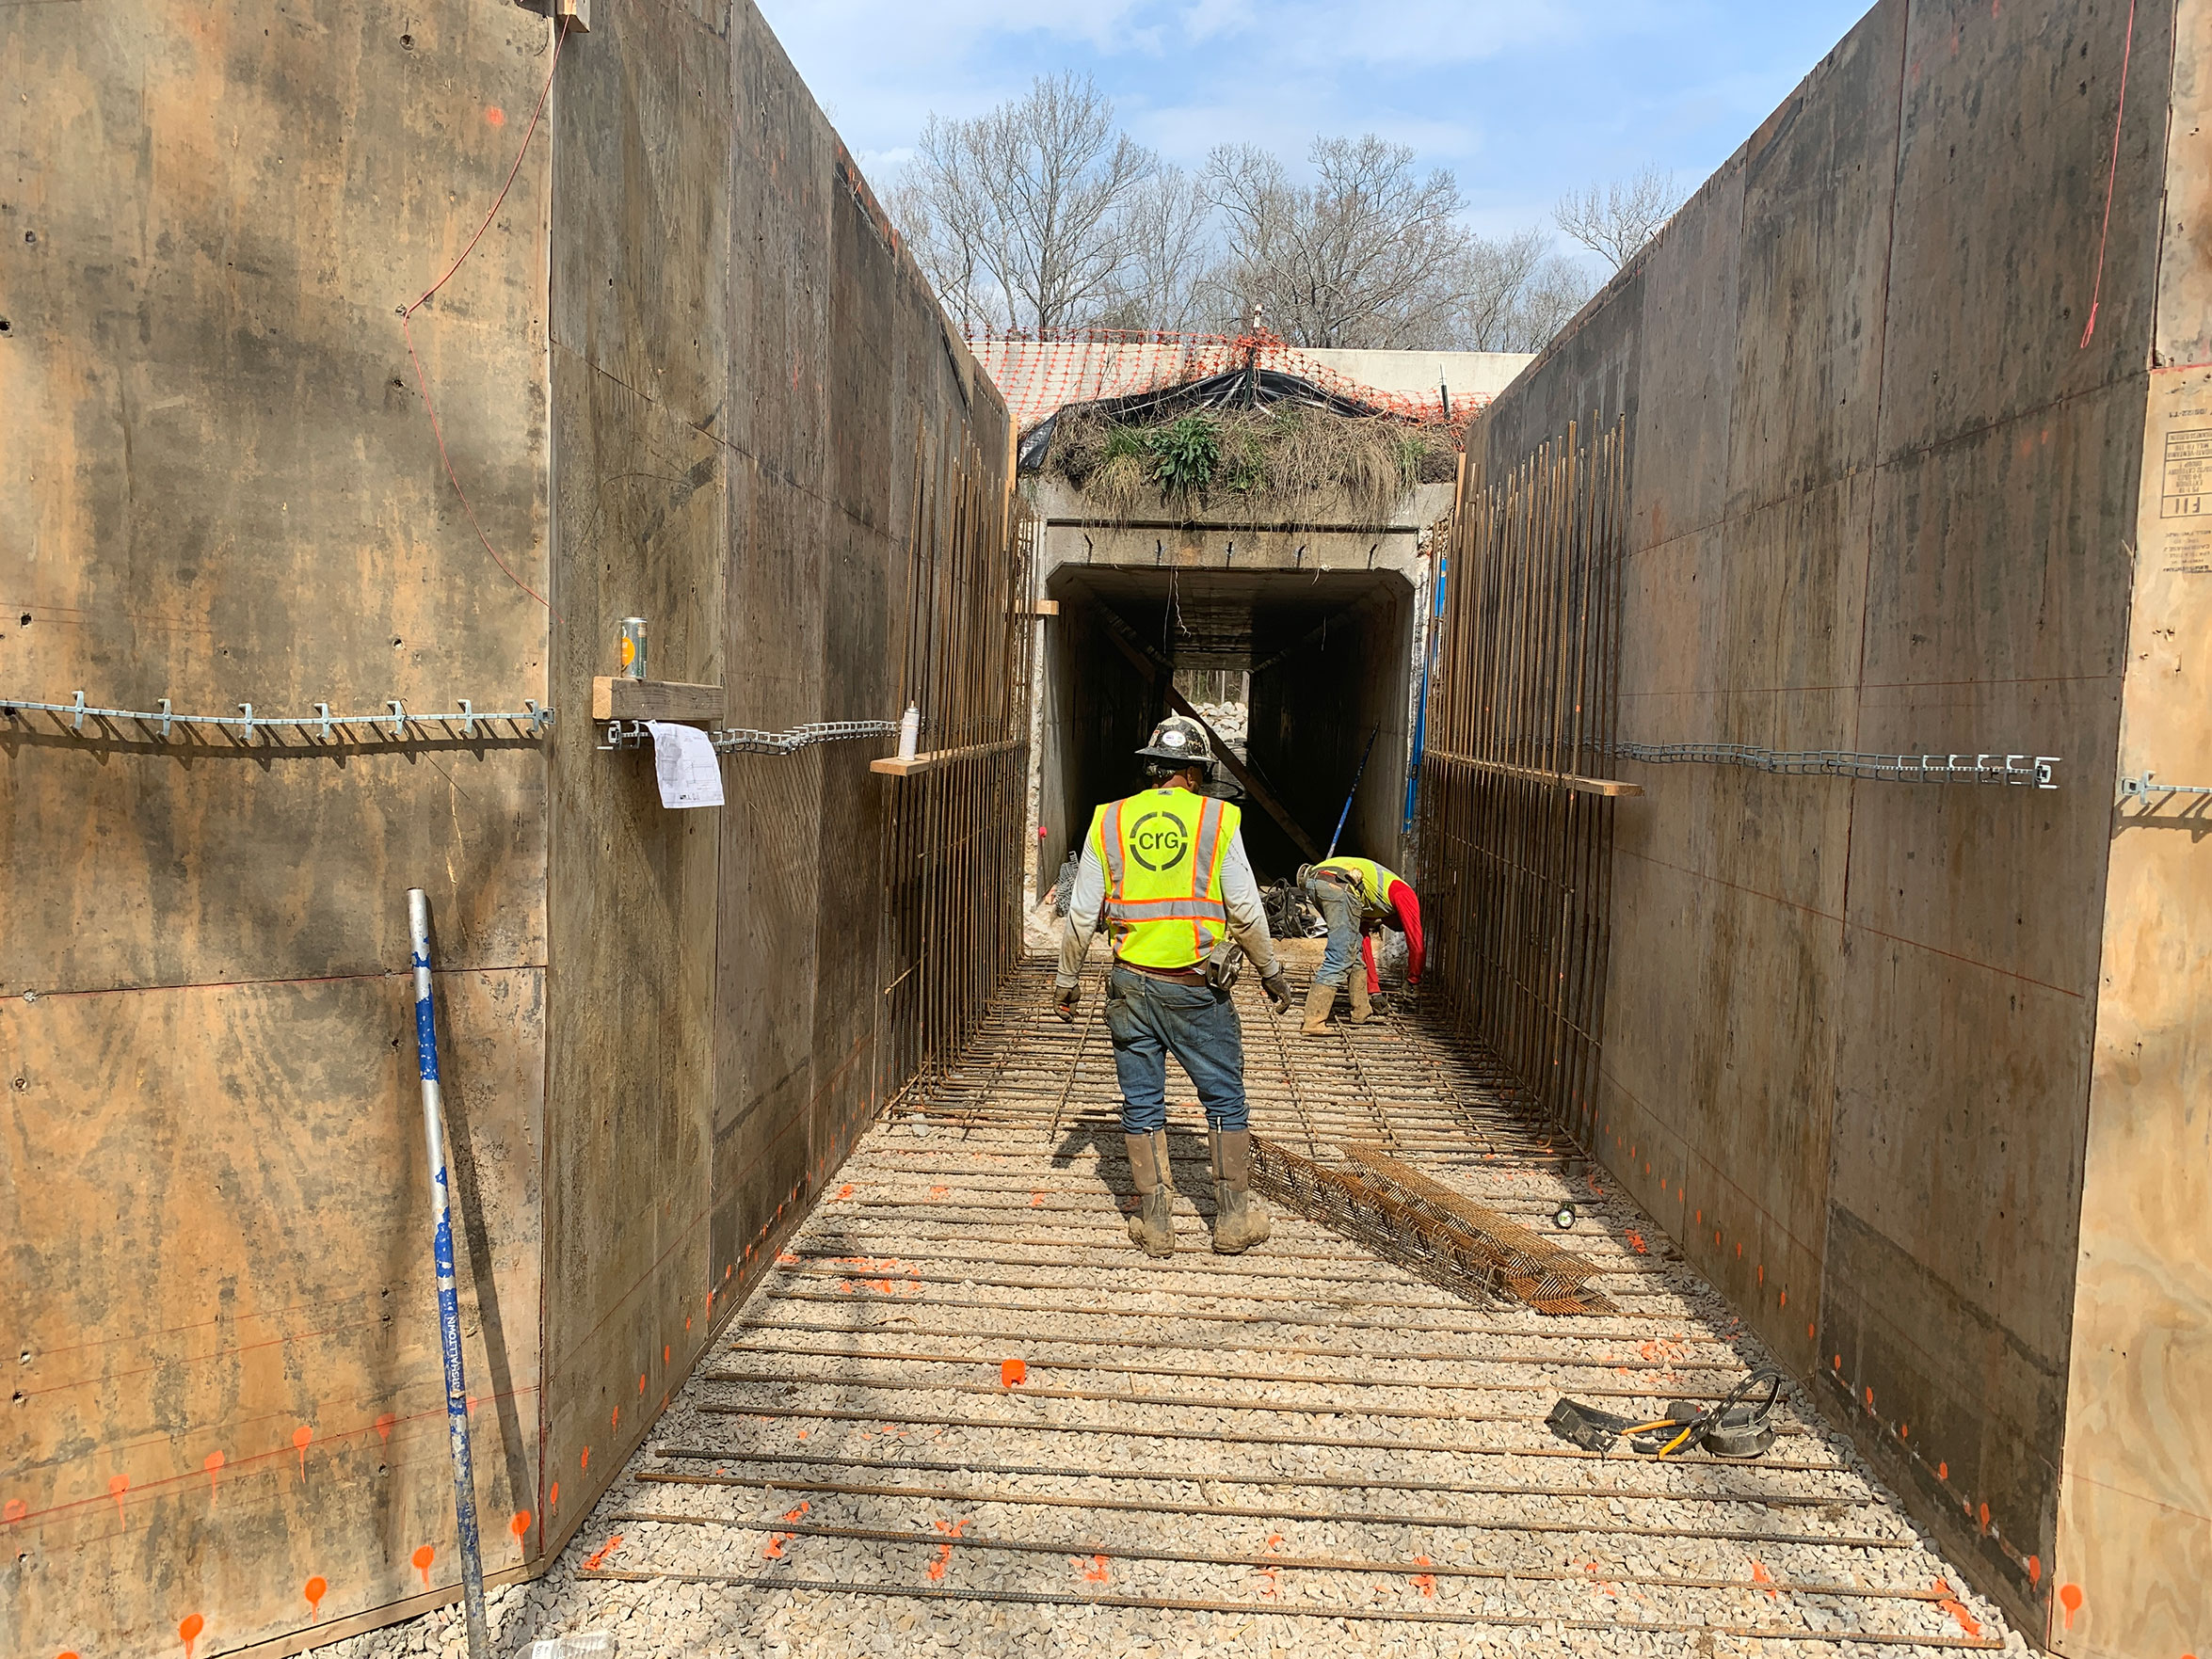 There are over 20 box culverts that run underneath I-26.  Each of these culverts has to be extended to accommodate the roadway widening.  Here workers are placing reinforcing steel for one of the extensions.